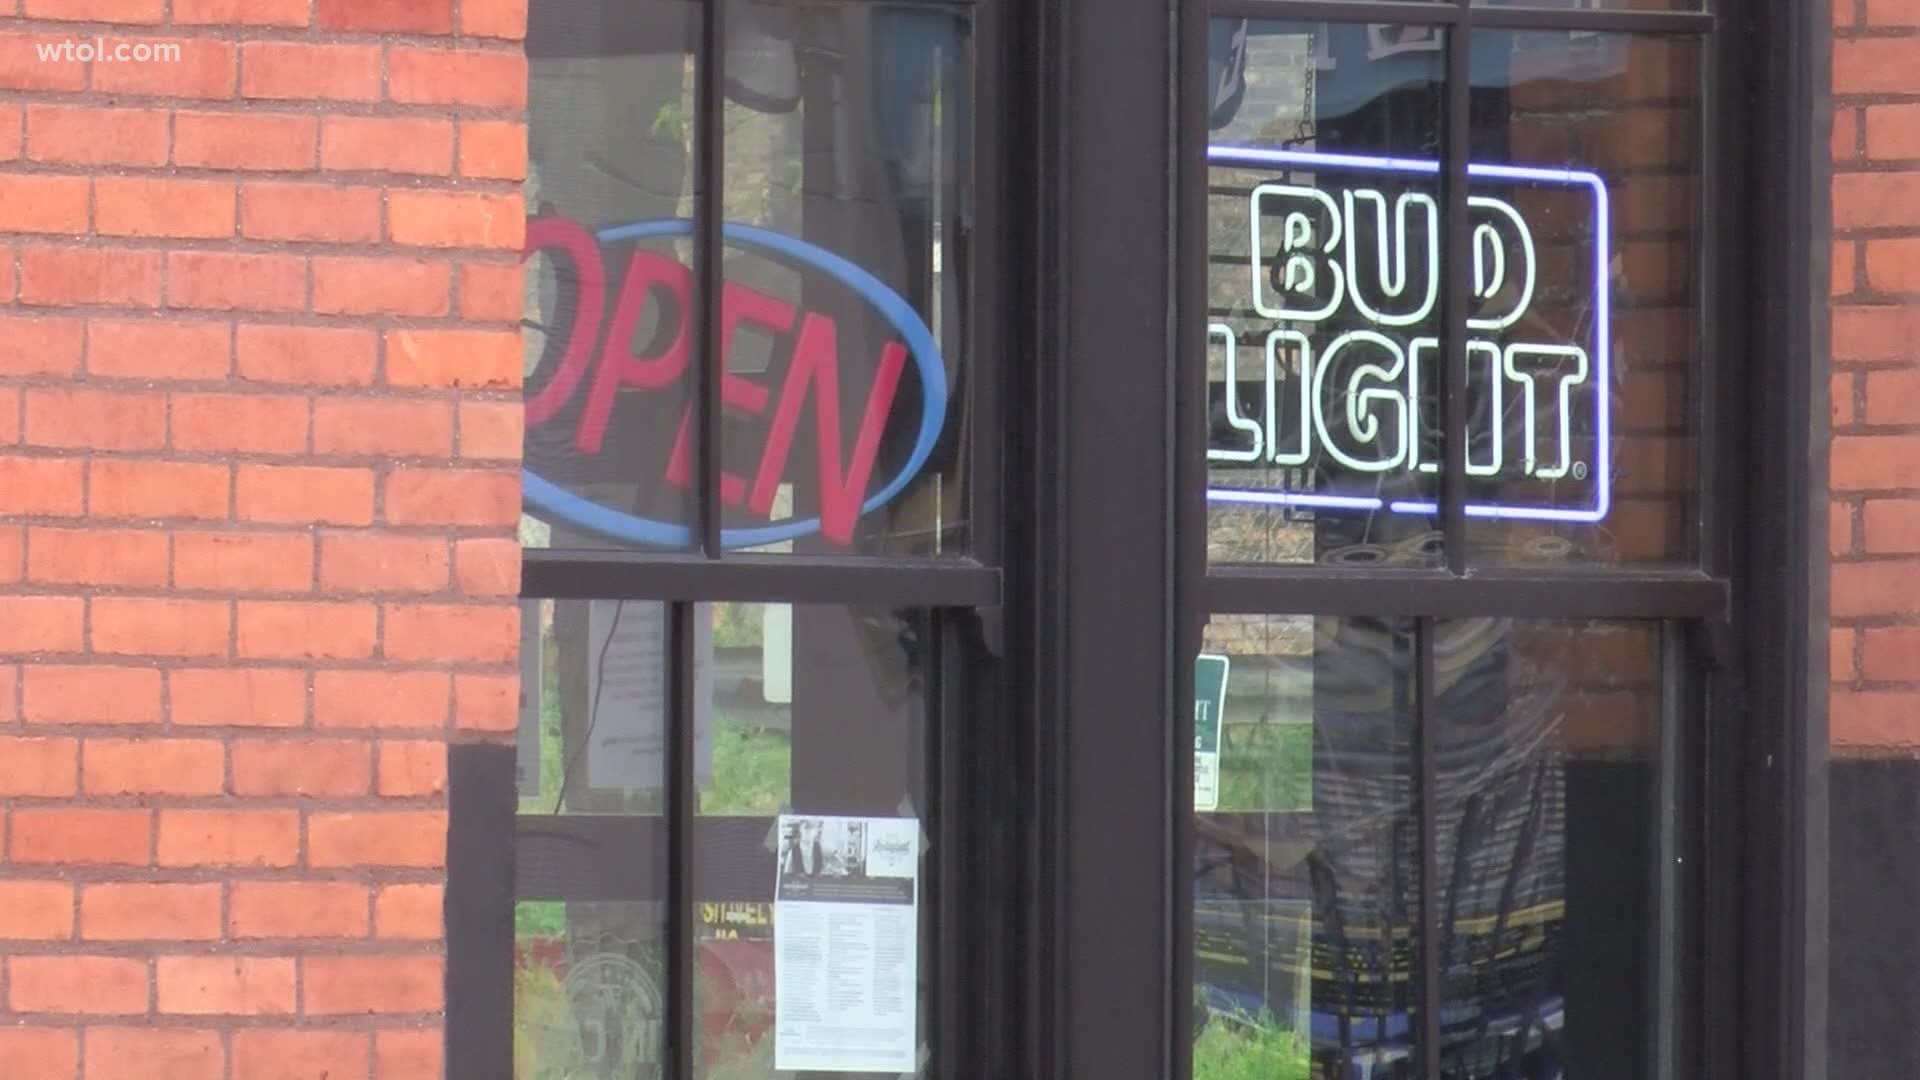 Local bar owners say after hearing the governor speak, they knew the commission's decision to ban the sale of alcohol after 10 p.m. was coming sooner or later.